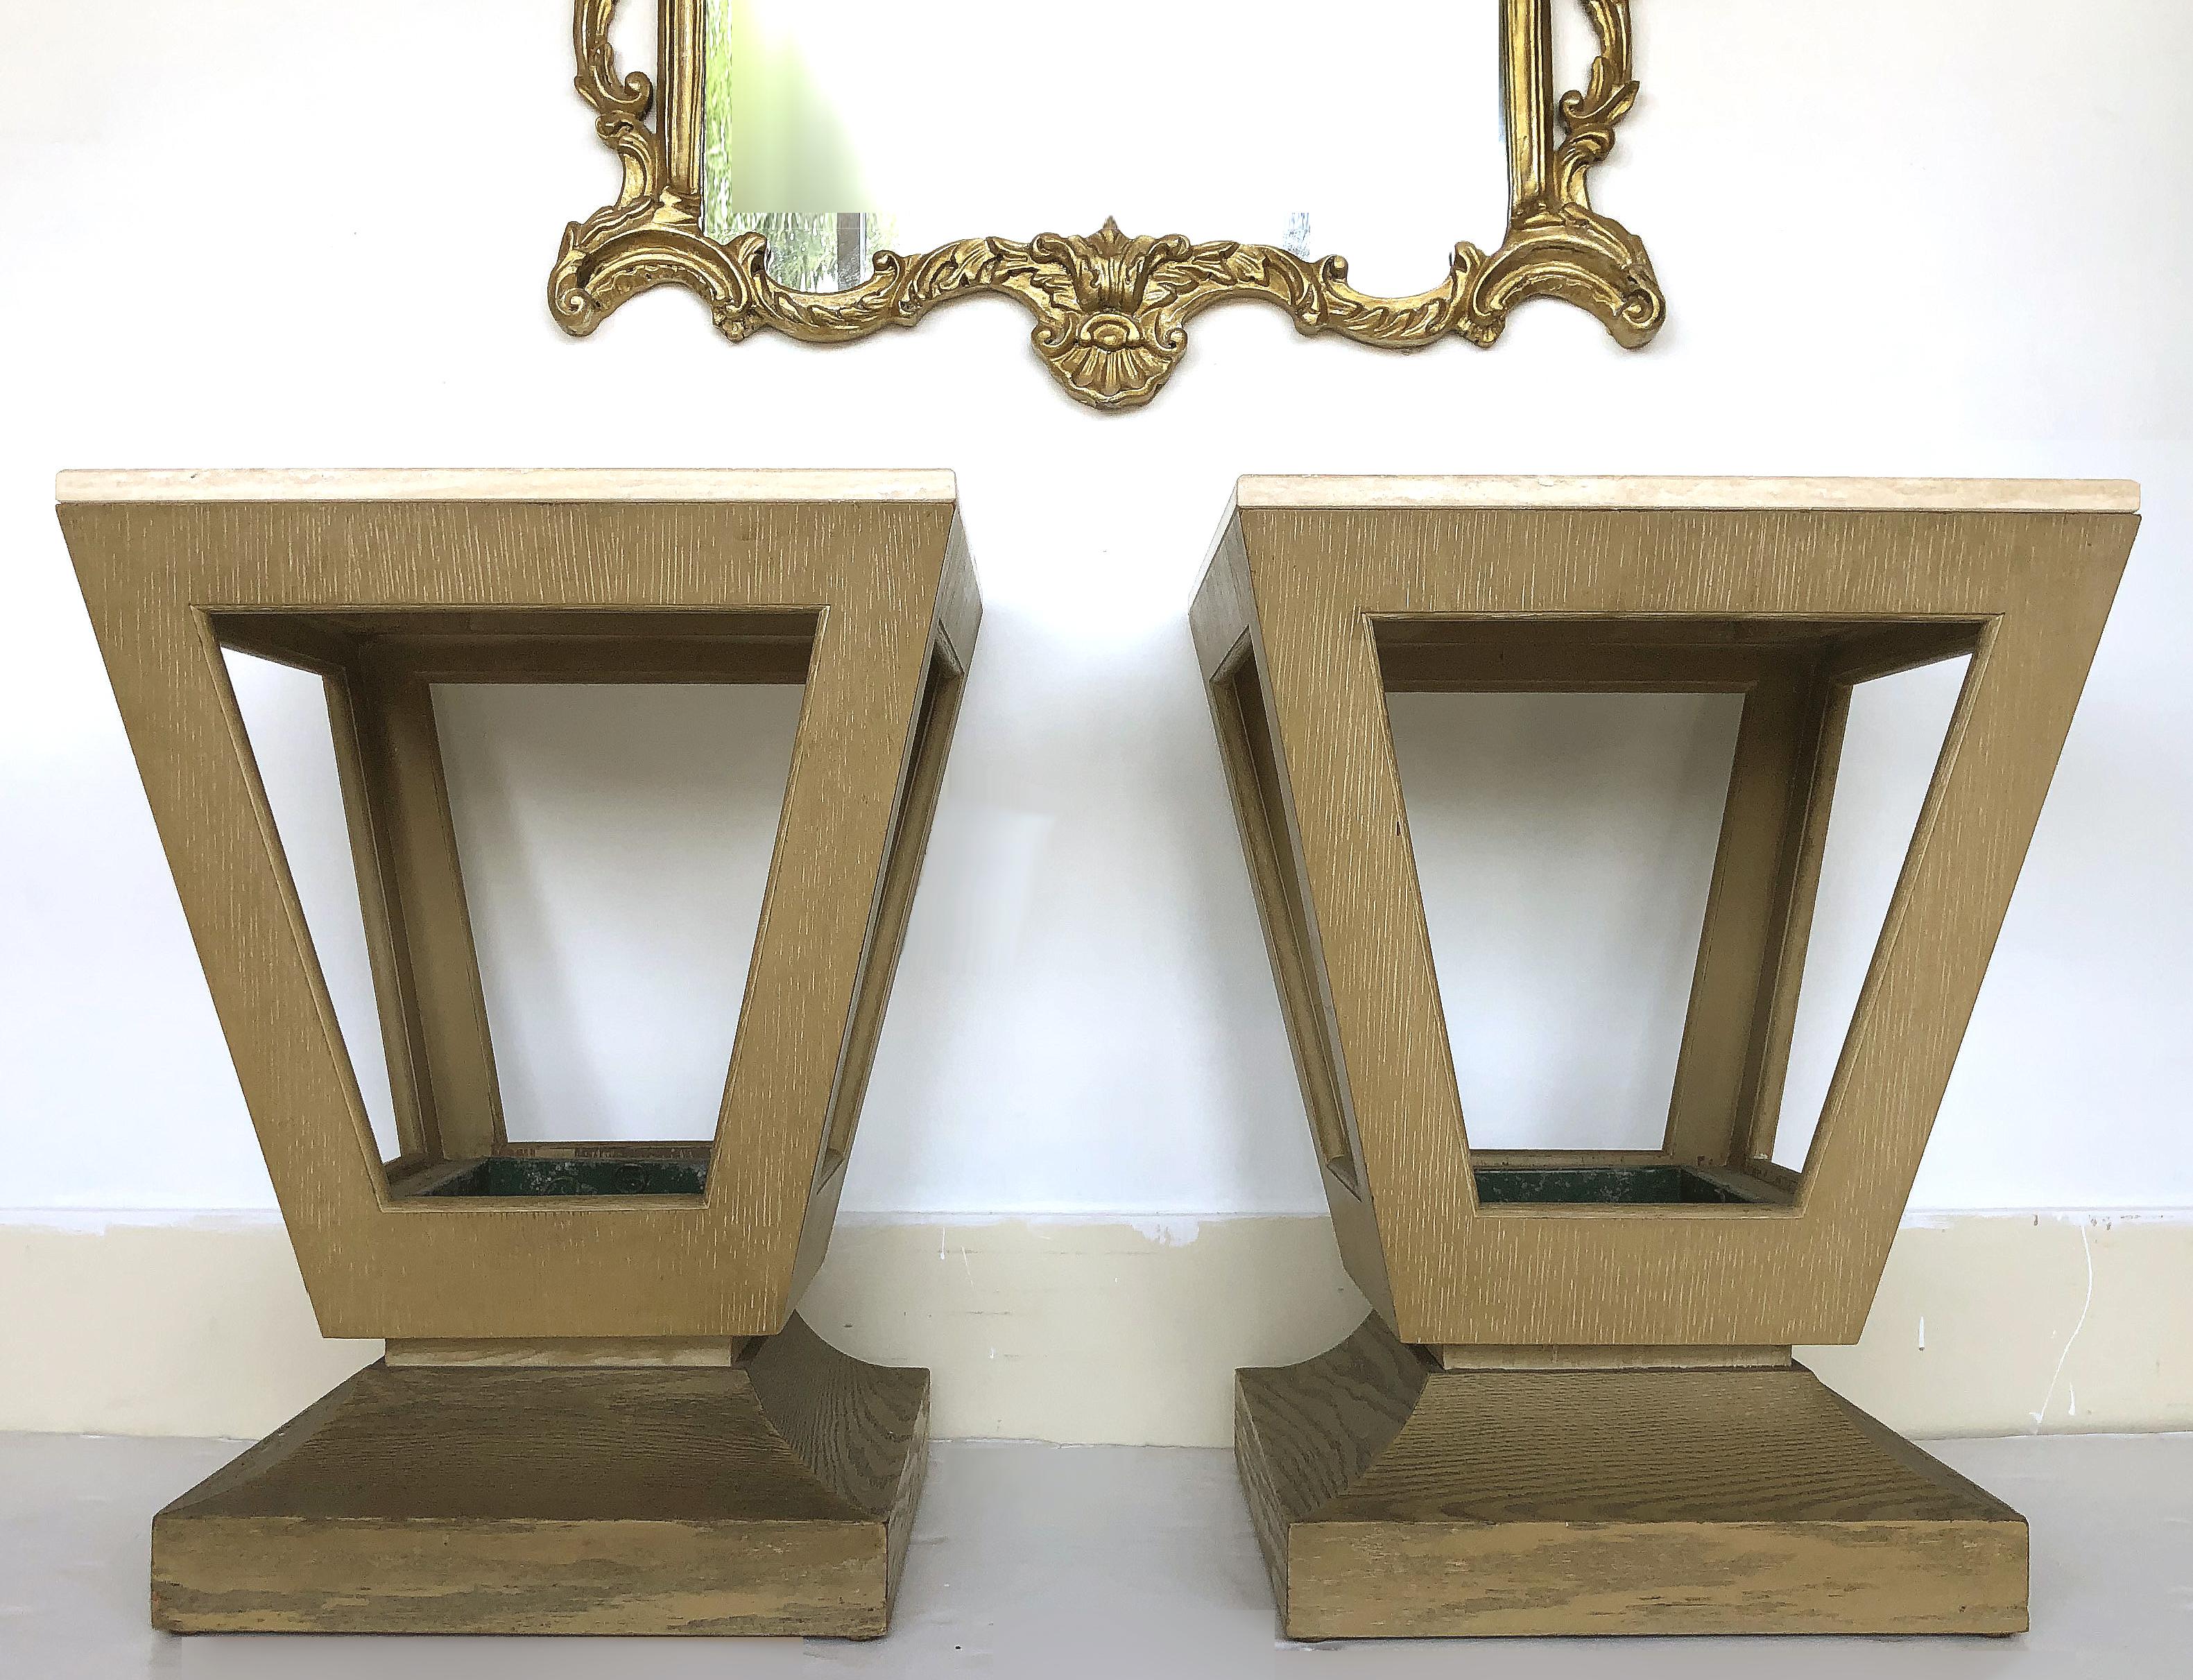 Art Deco cerused wood/Travertine end/side tables with planters

Offered for sale is a pair of cerused Art Deco Cerused end tables with travertine tops and metal planter inserts beneath. These tables are finished on all sides and will float nicely